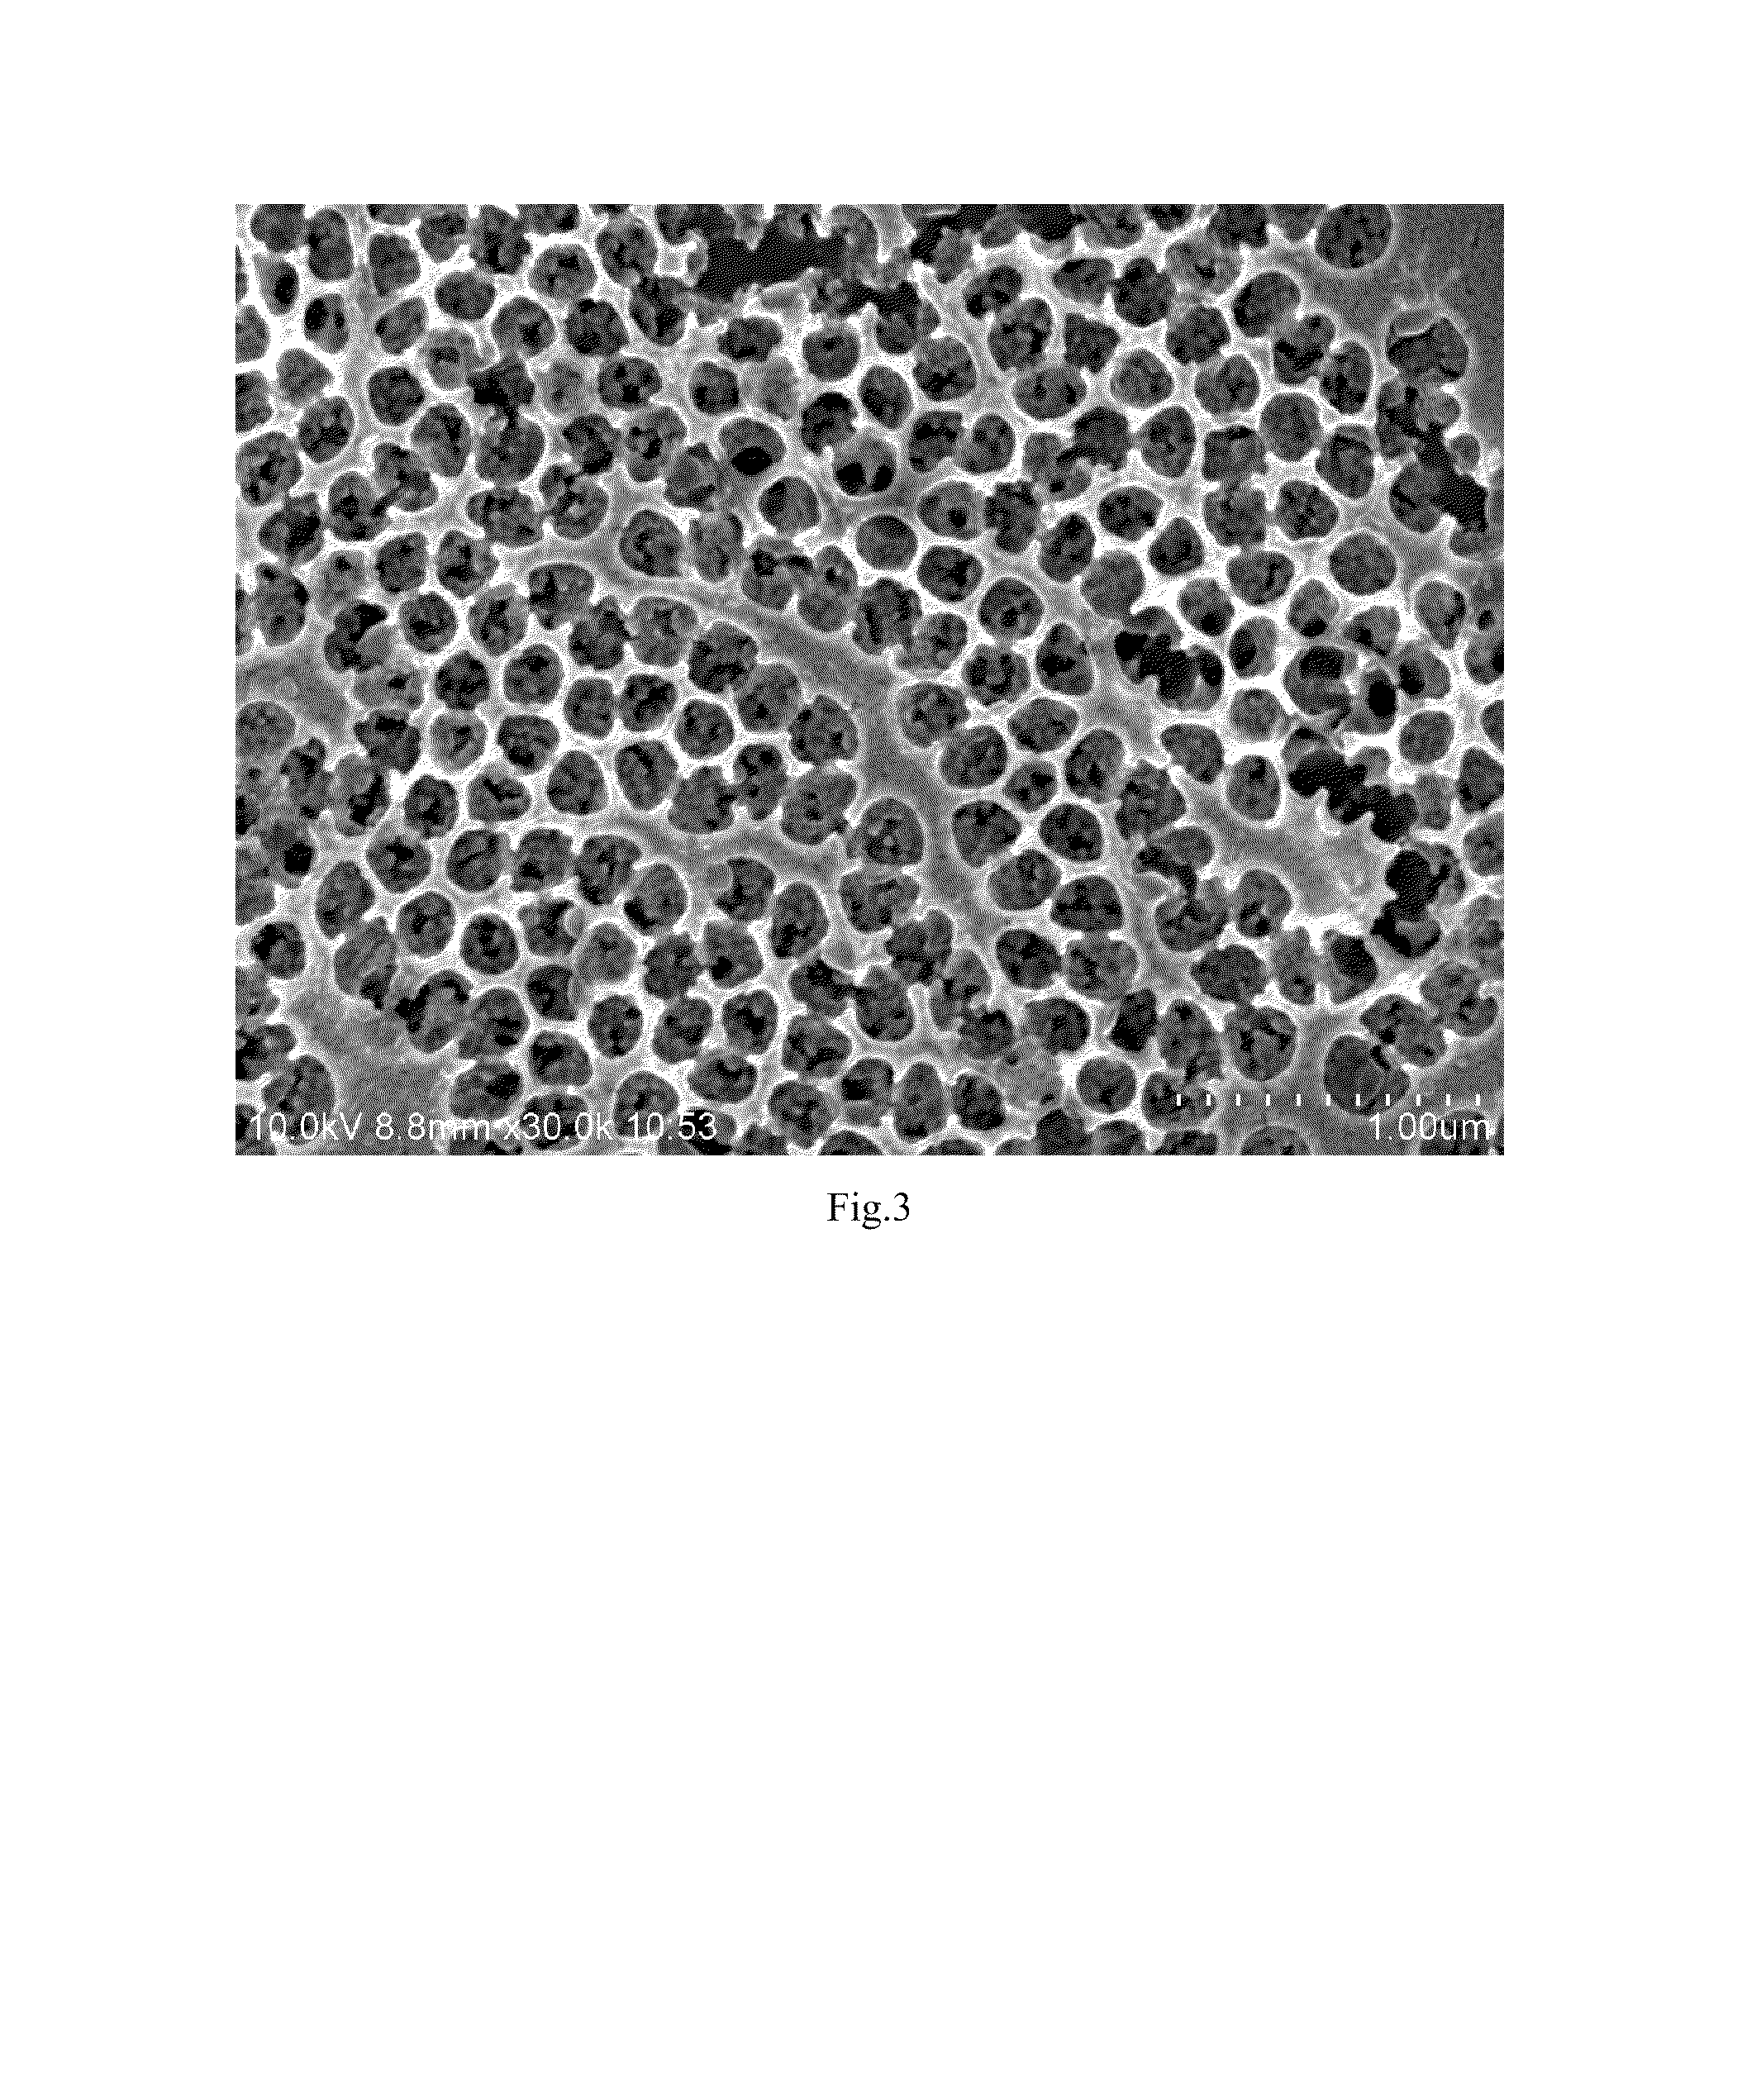 Methods of making platinum and platinum alloy catalysts with nanonetwork structures